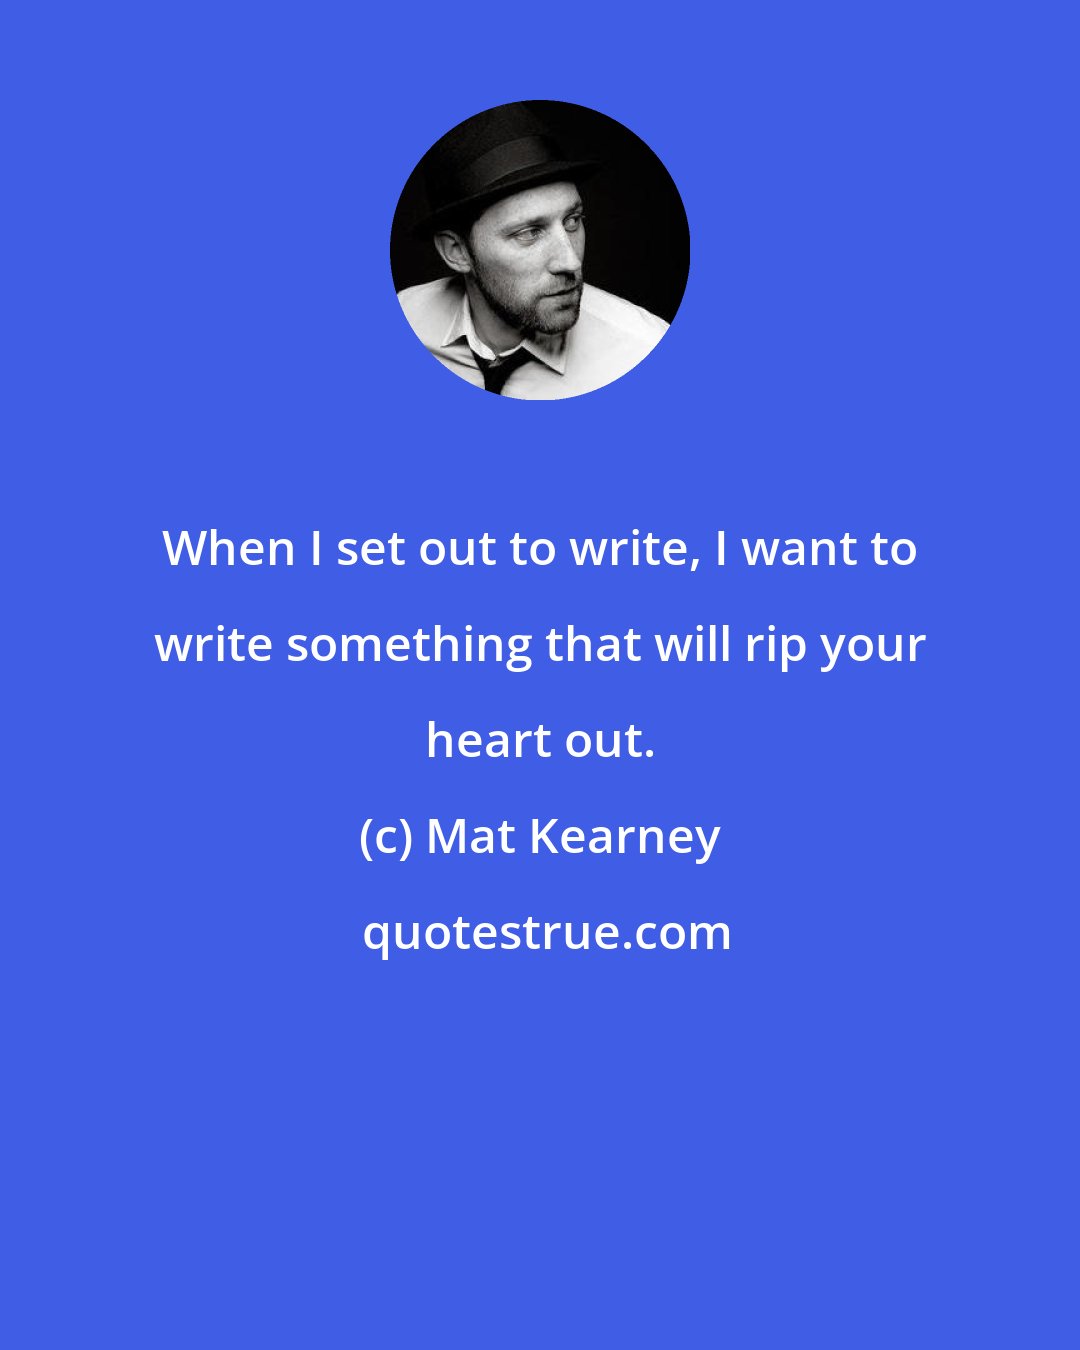 Mat Kearney: When I set out to write, I want to write something that will rip your heart out.